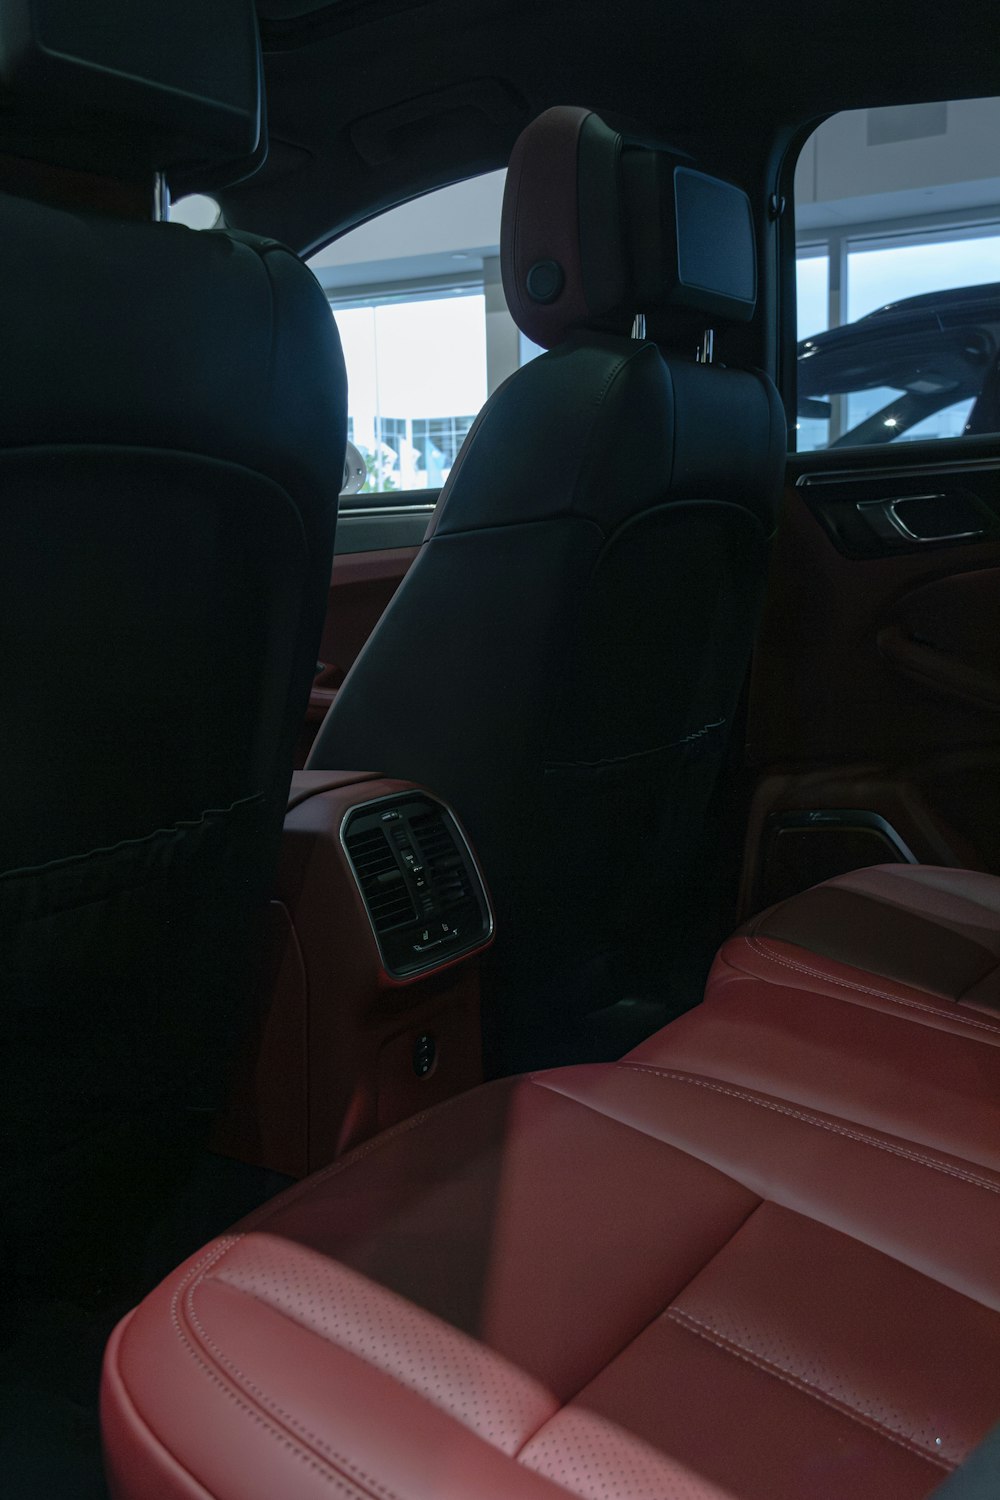 the interior of a car with red leather seats